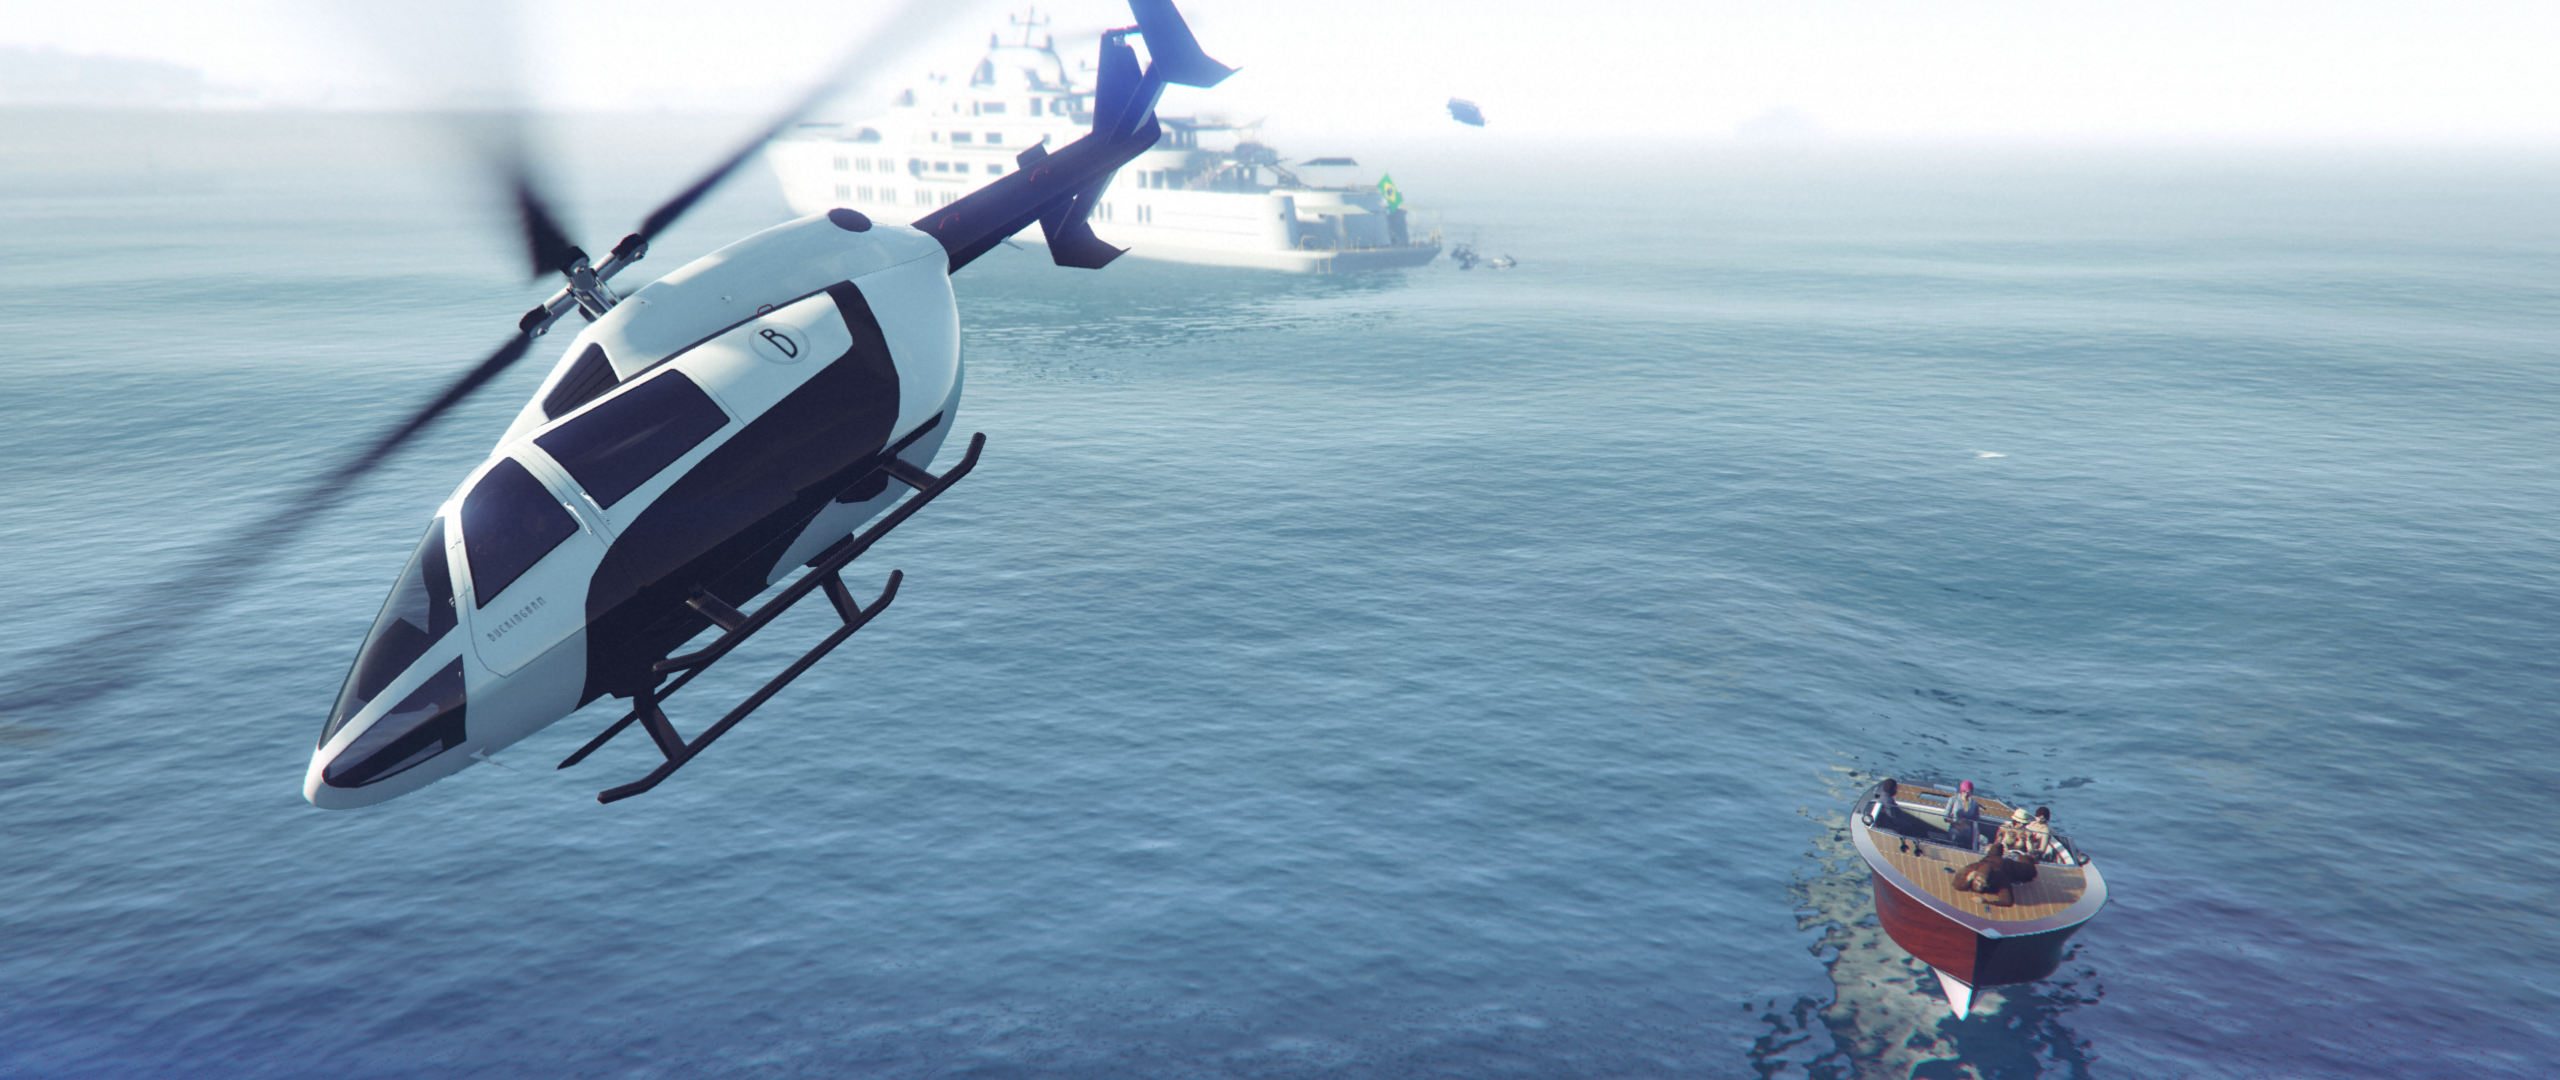 Grand Theft Auto V Screen Shot Grand Theft Auto Video Games CGi Water Helicopters Aircraft Boat Vide 2560x1080